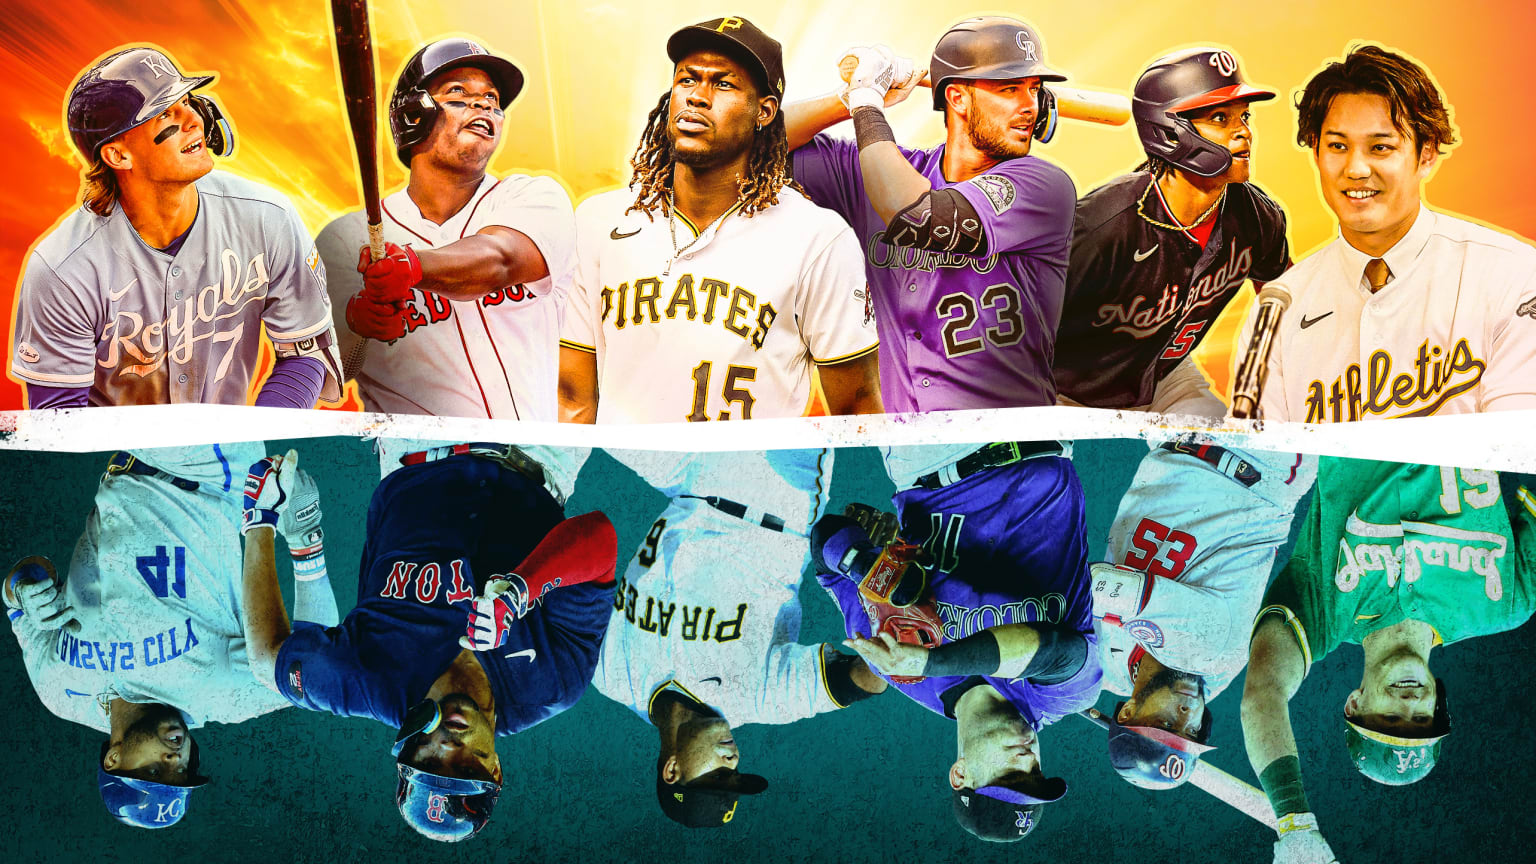 A photo illustration showing players from six teams in front of a bright background on the top half, and players from those same six teams reflected upside-down over a dark background in the lower half